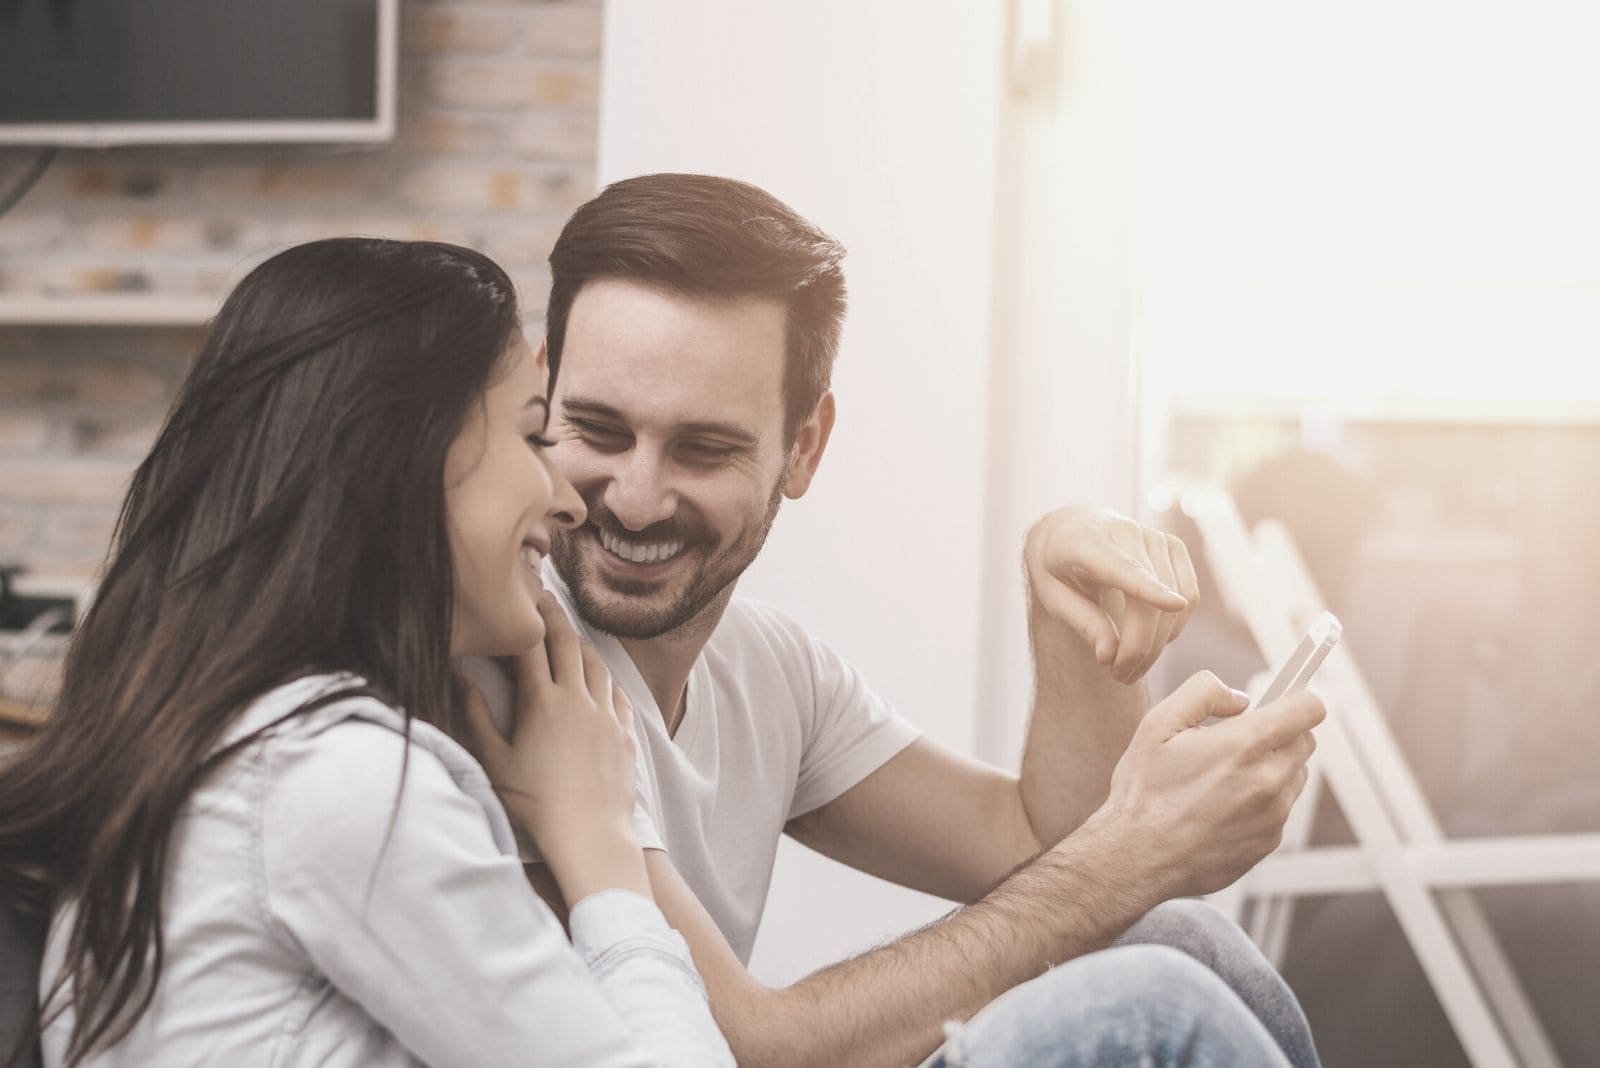 sweet couple looking at the smartphone held by the man while sitting near the television